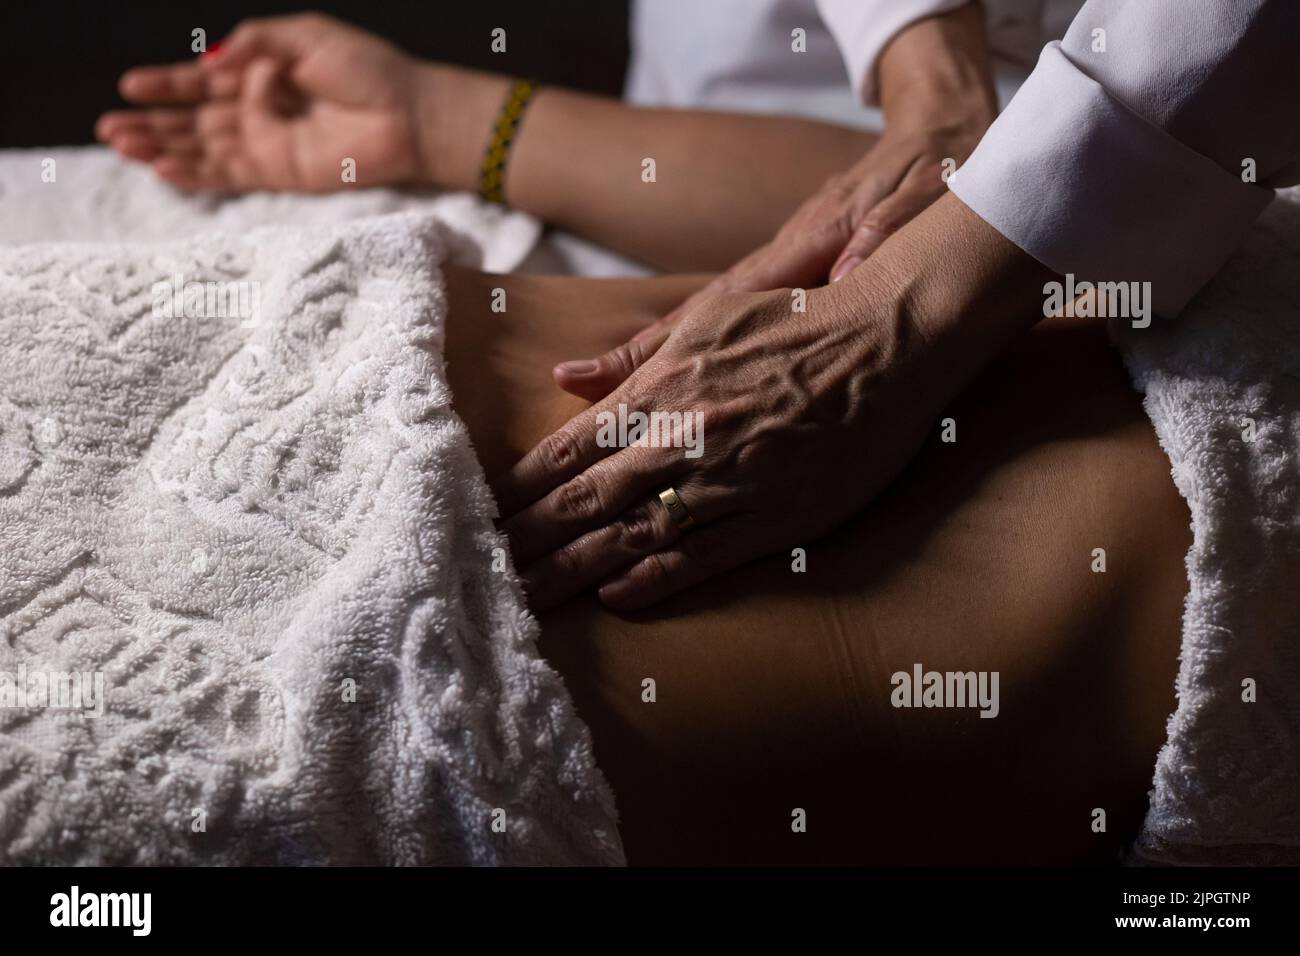 Goiânia, Goias, Brazil – July 18, 2022: Closeup of massage therapist hands applying therapeutic massage on a patient's belly. Stock Photo